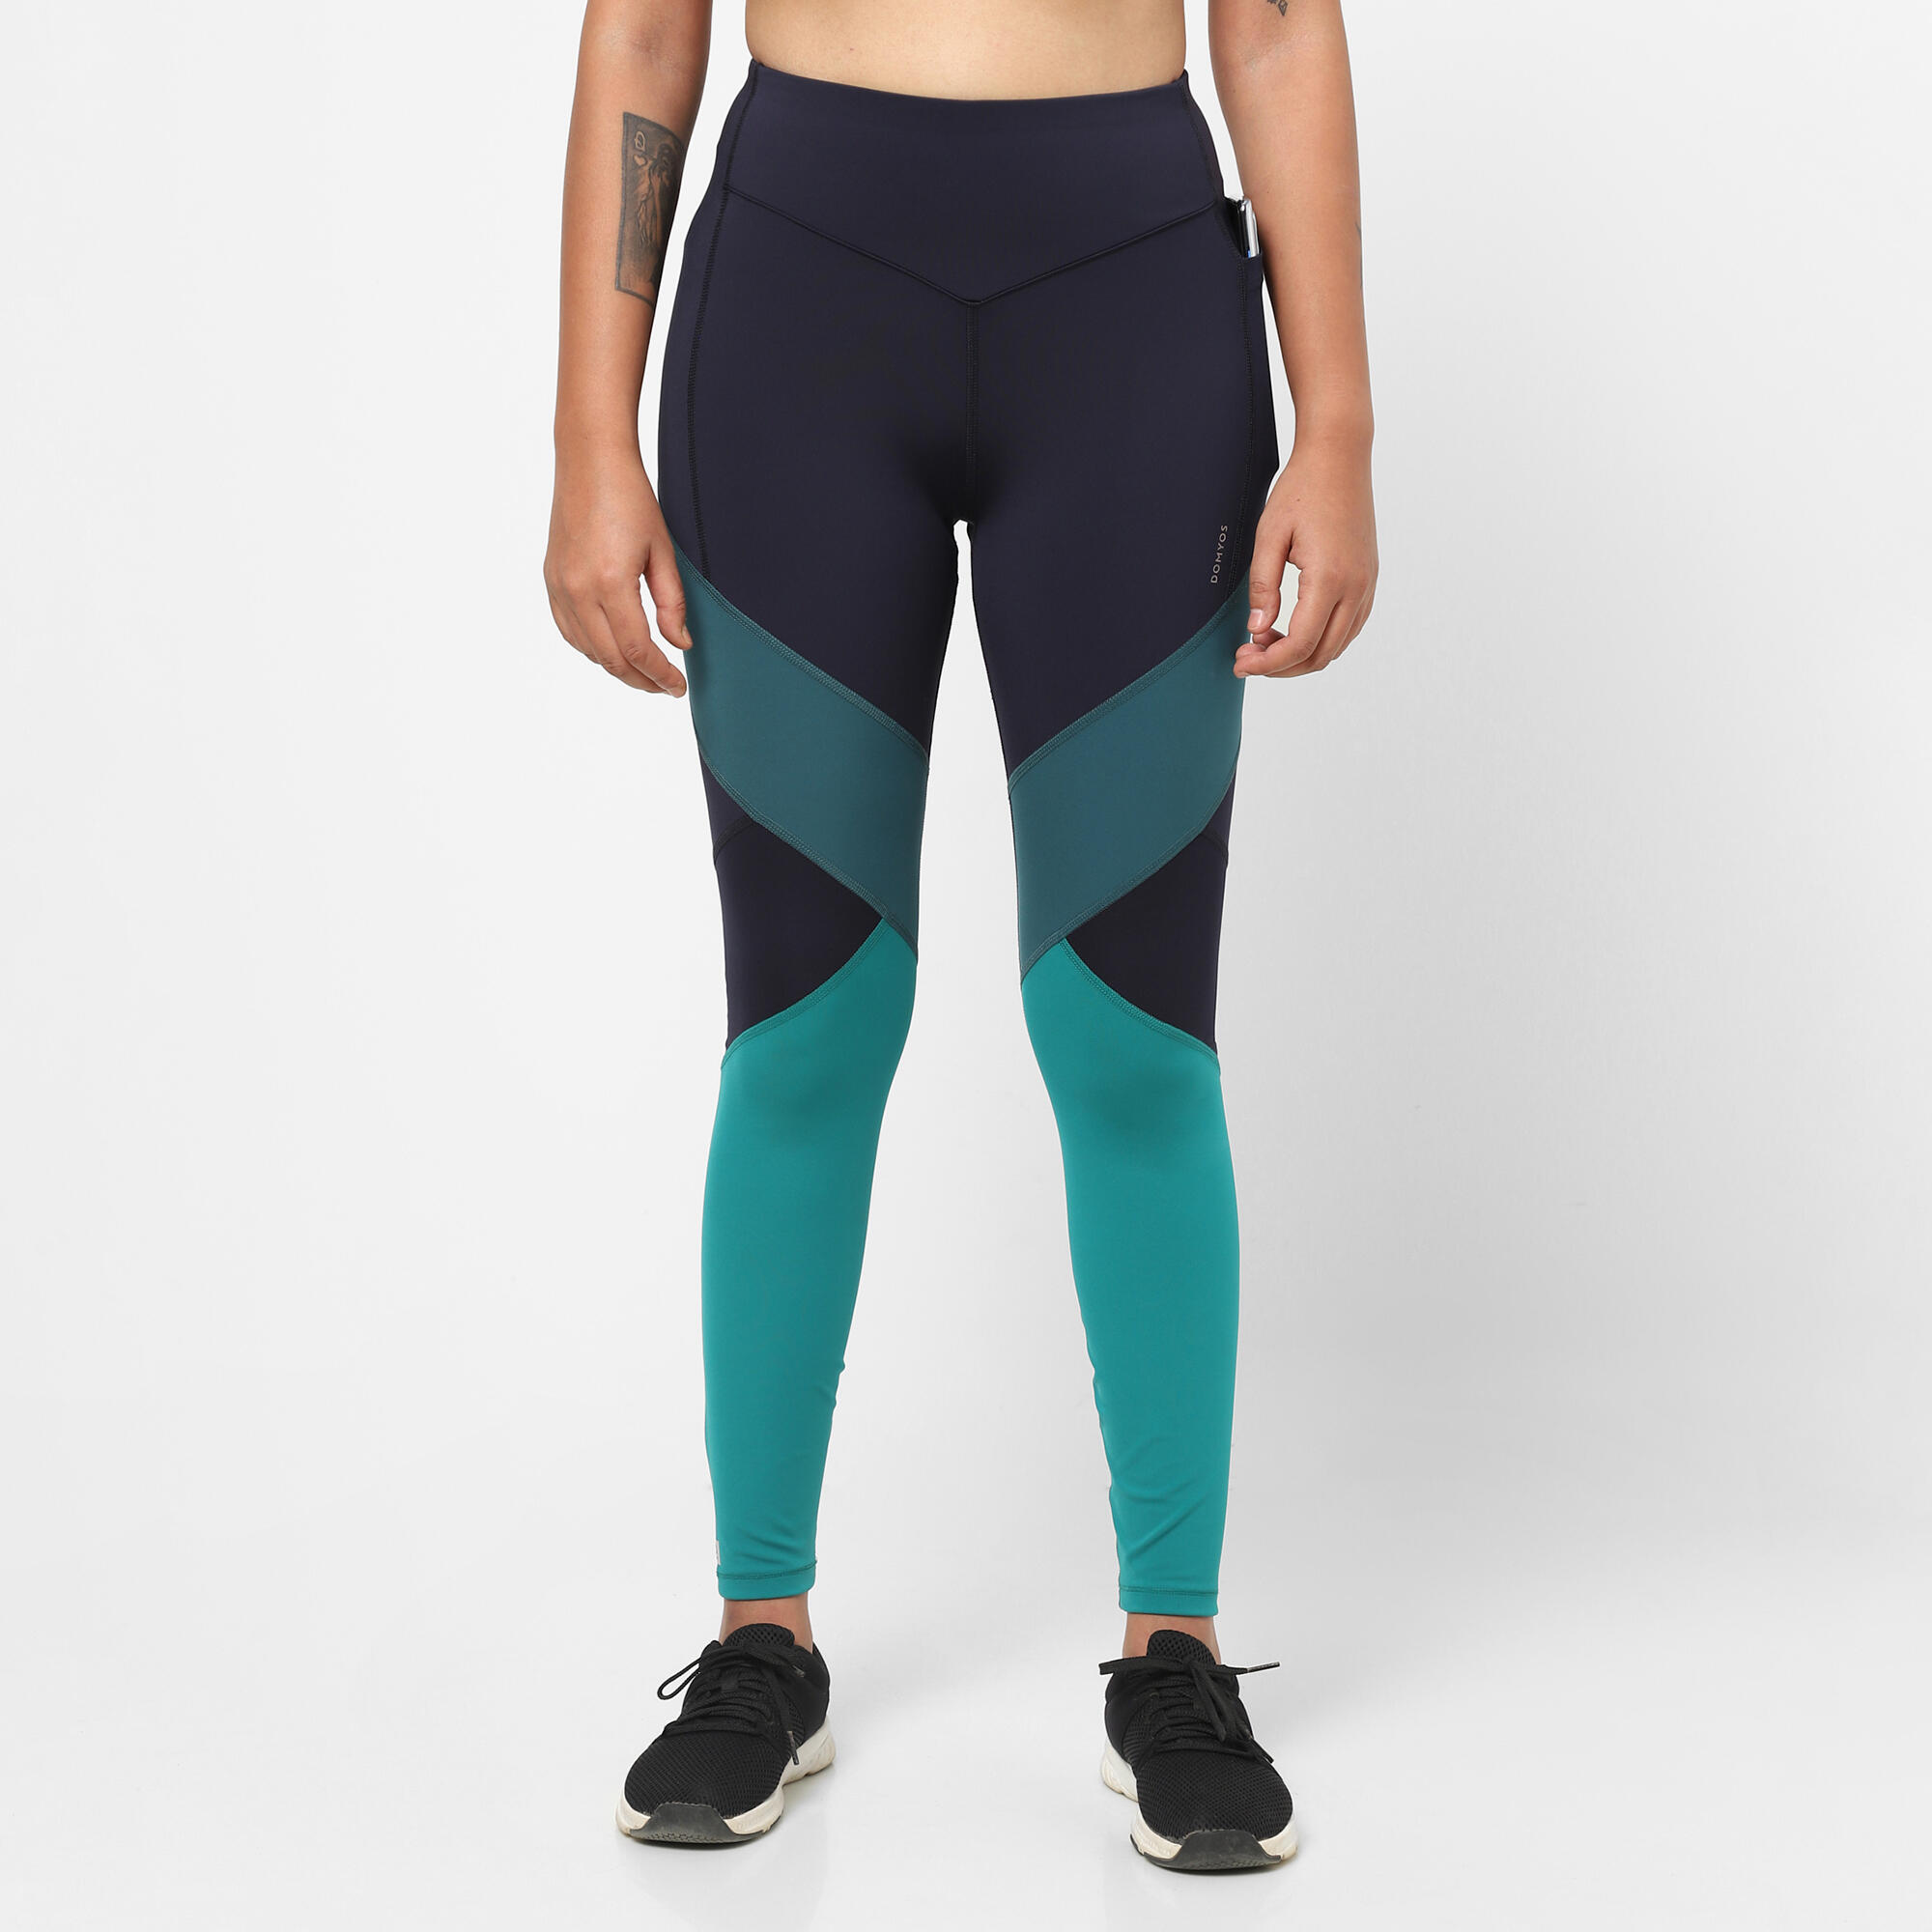 Decathlon Sports India - RCity - Living on a tight budget? You can still buy  those tights under just 999. https://www.decathlon.in/p/8554673/fitness- leggings/100-women-s-fitness-cardio-training-leggings-black?utm_source=IGShopping&utm_medium=Social  ...